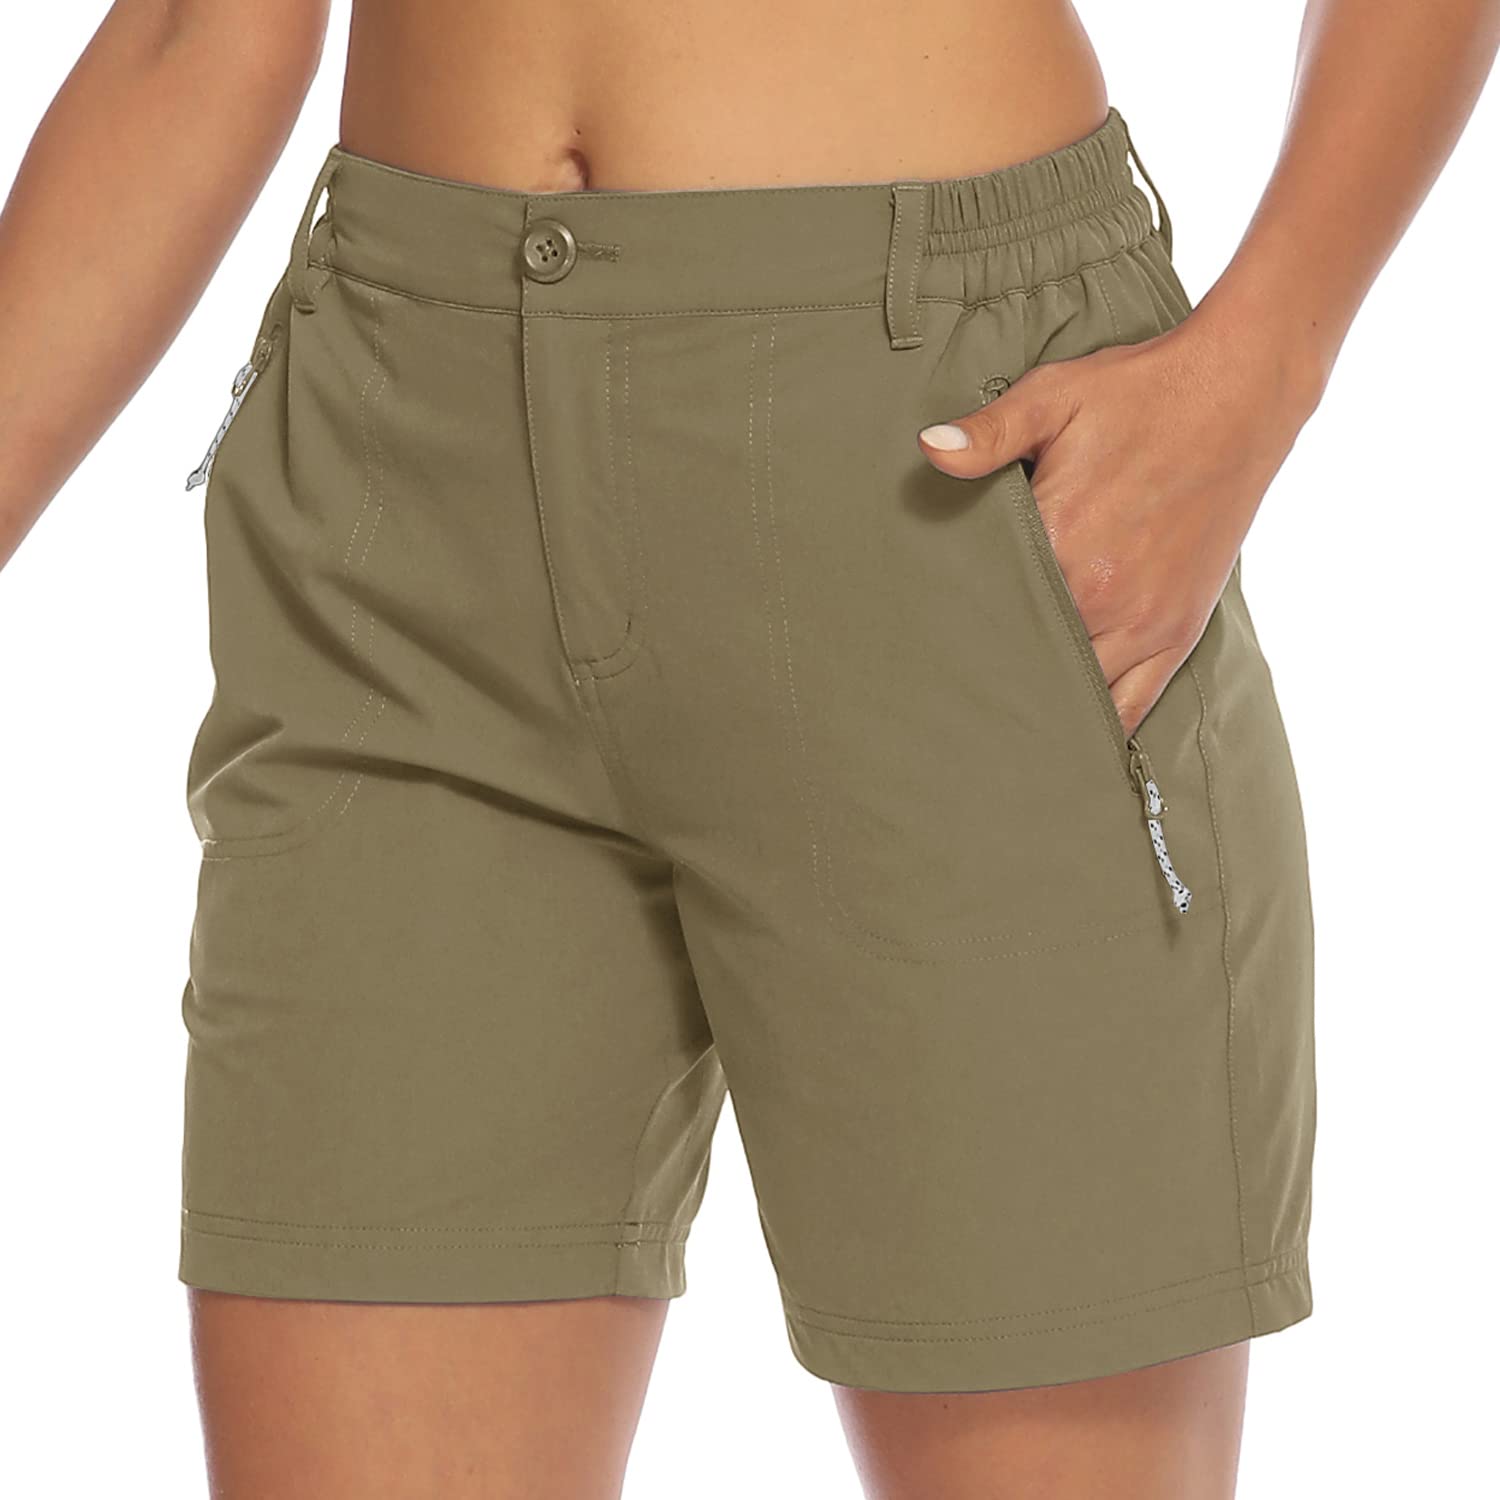 Tbmpoy Womens Hiking Cargo Shorts Quick Dry With Pockets Lightweight Running Golf Outdoor Active Summer Shorts Olive Green Xxl